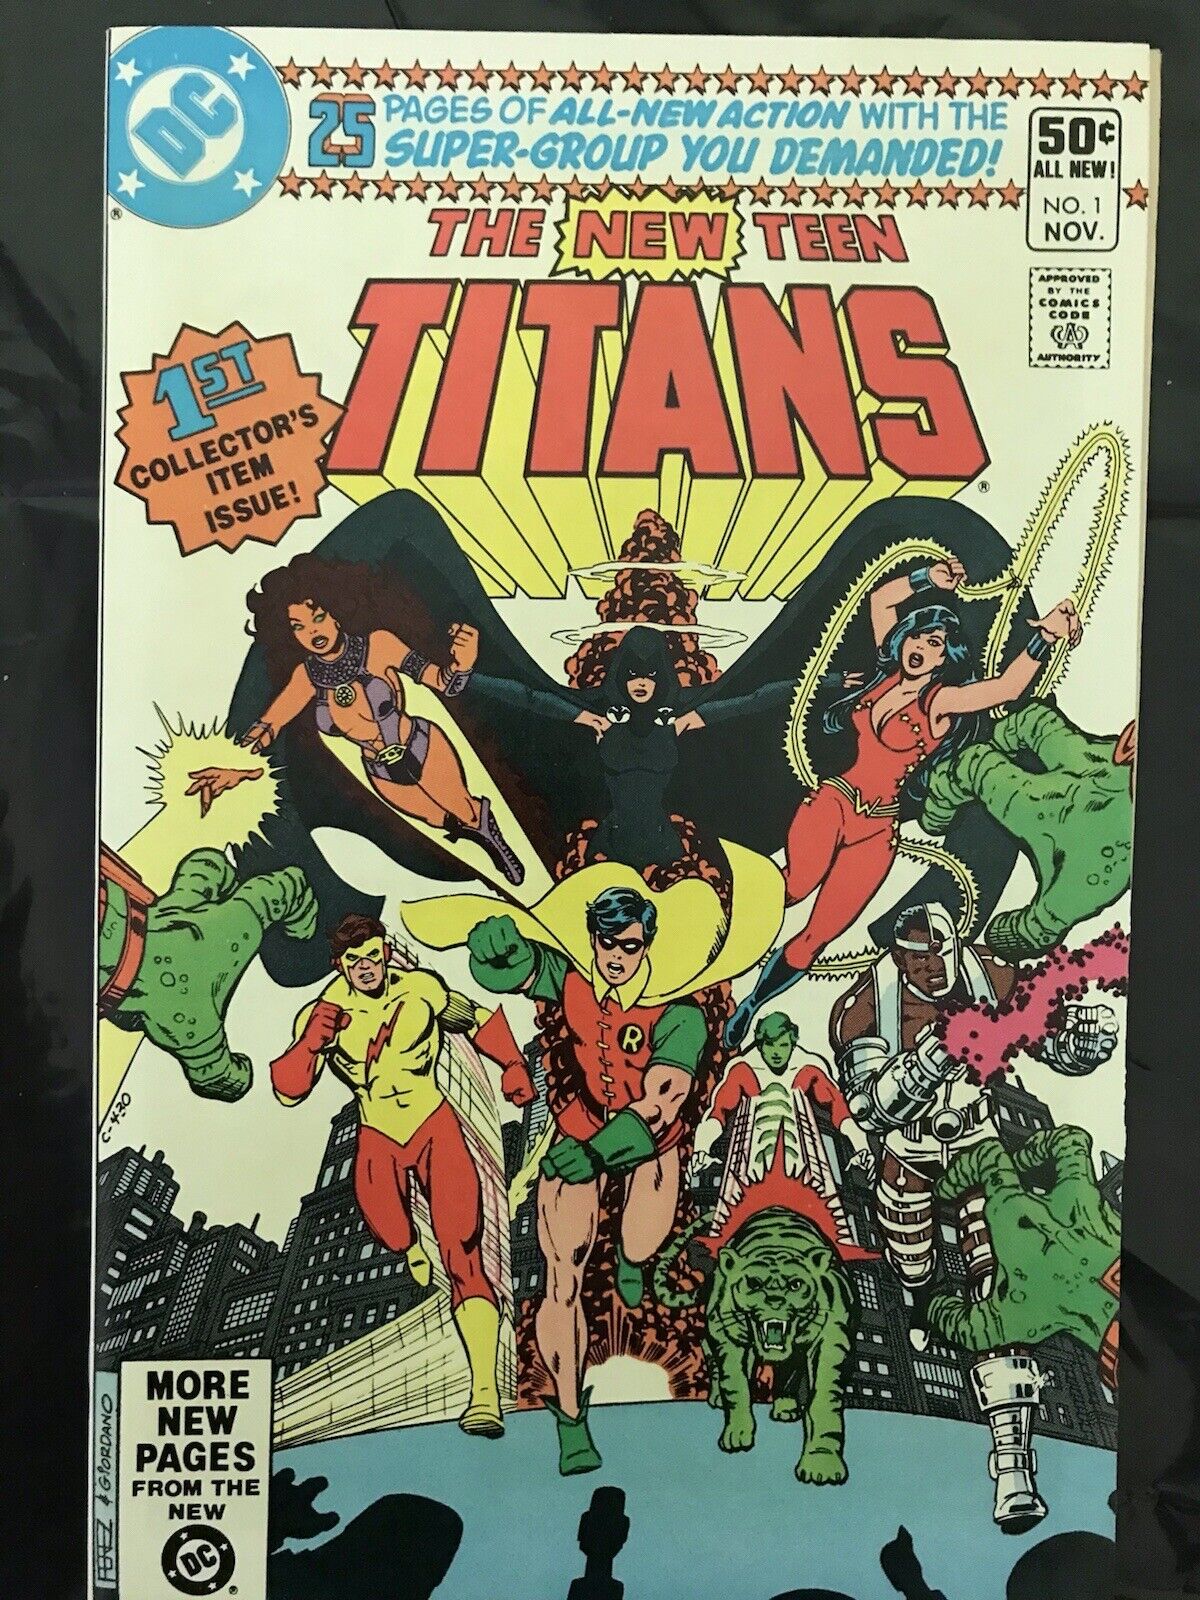 The New Teen Titans #1,  9.8 NM-M FLAWLESS COPY.   November 1980. NEW TEAM